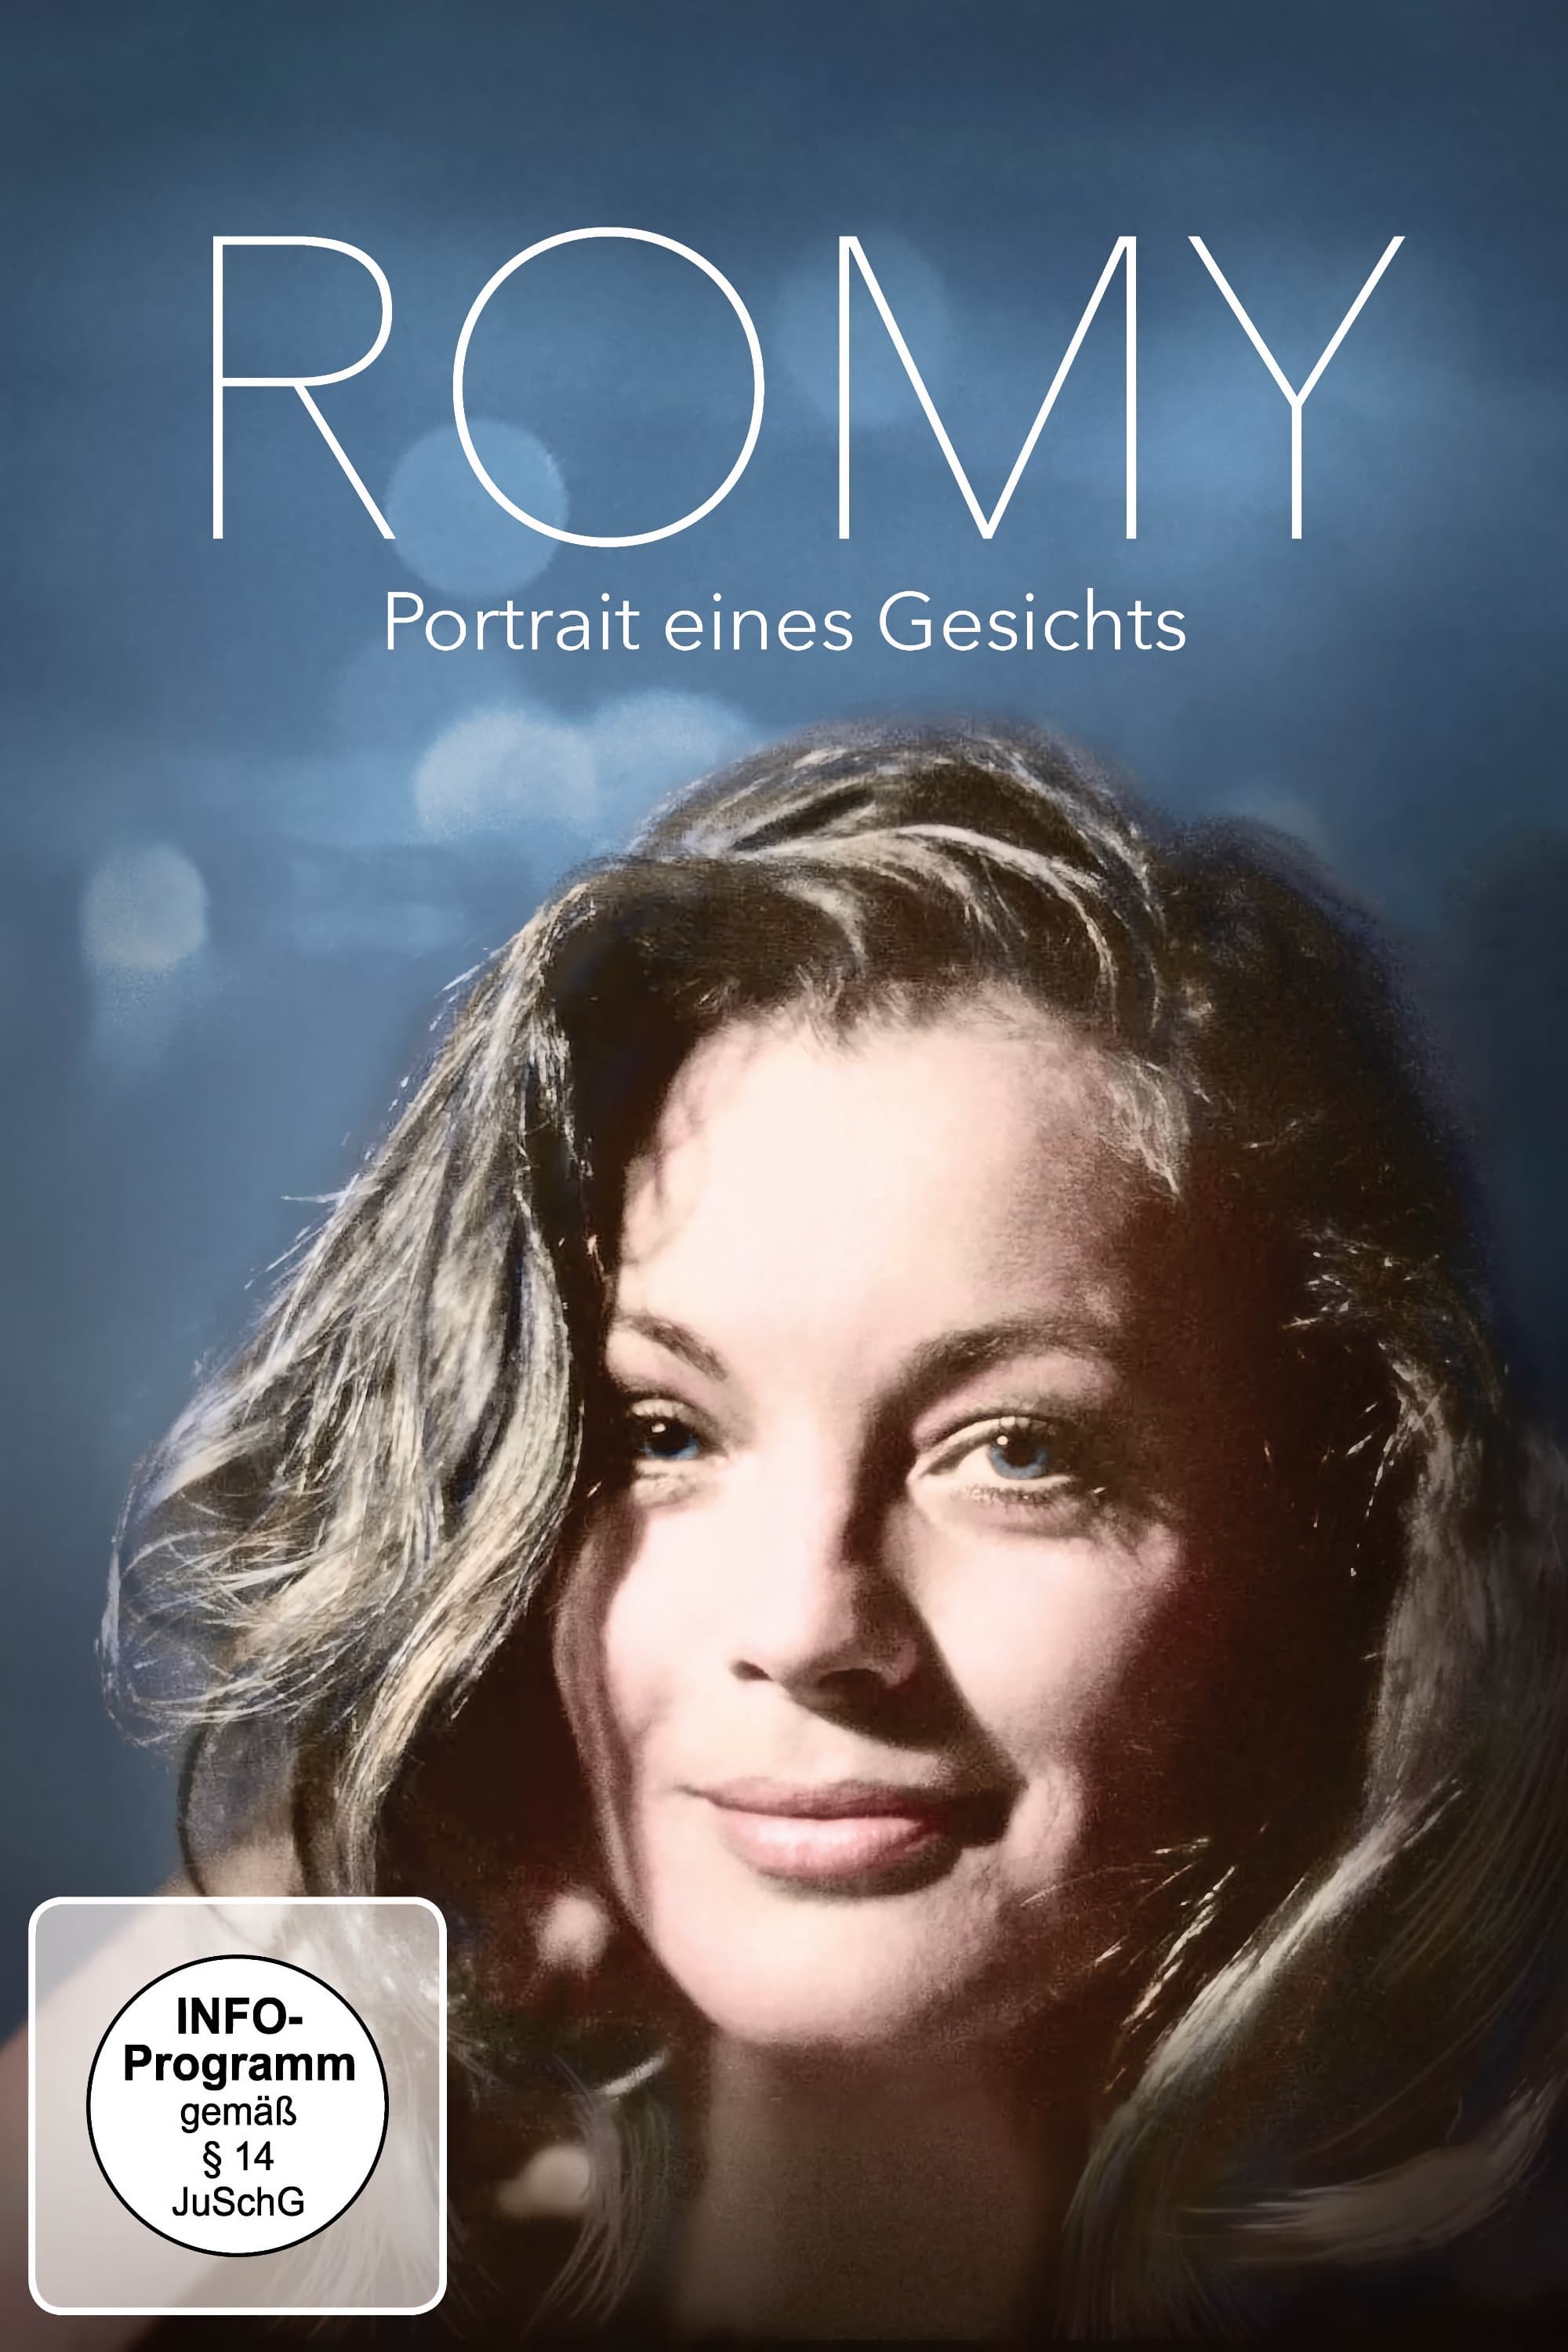 Romy: Anatomy of a Face